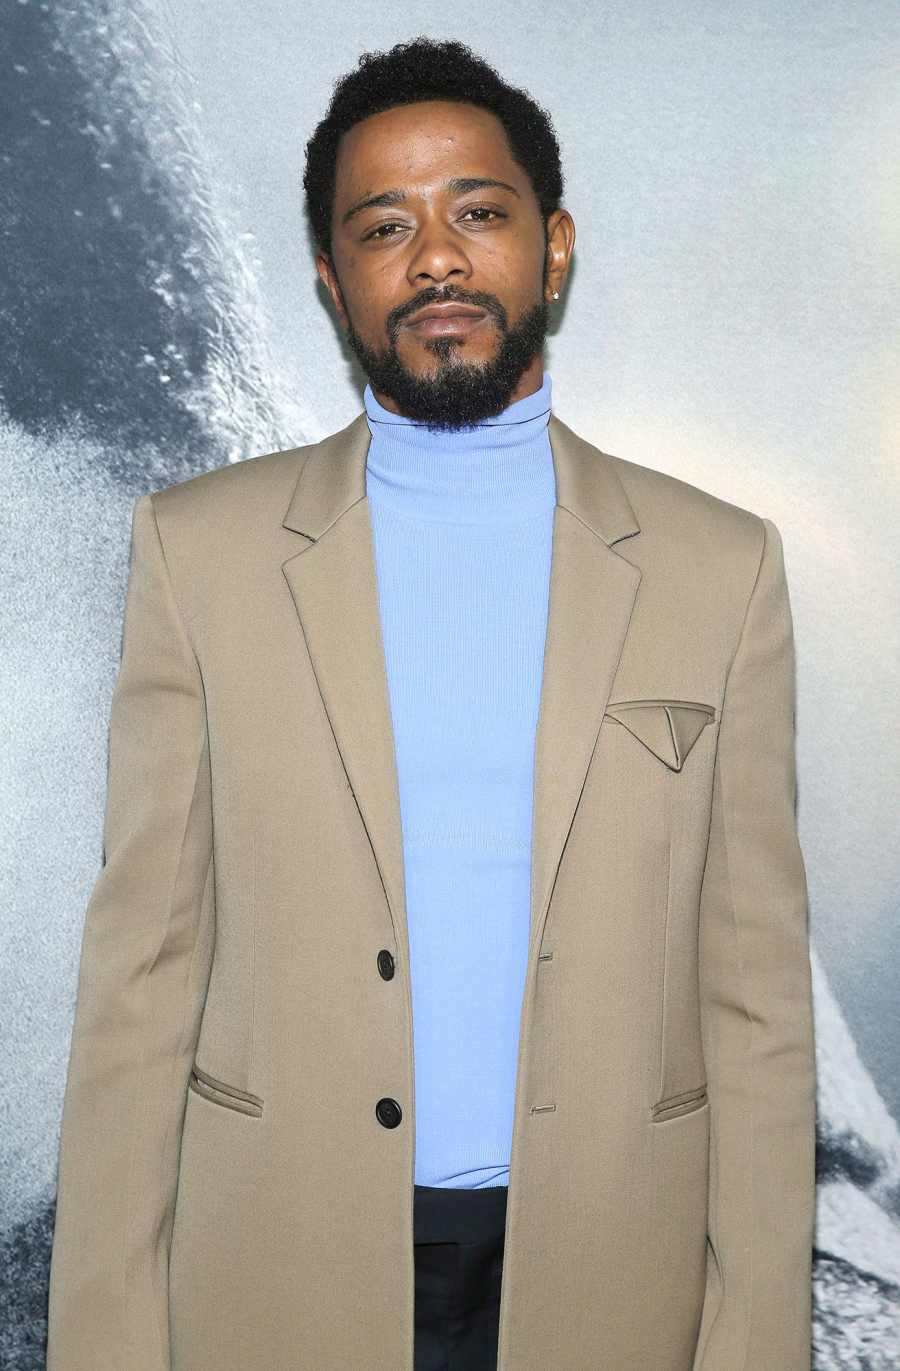 LaKeith Stanfield Oscars 2021 Nominations Nominees React